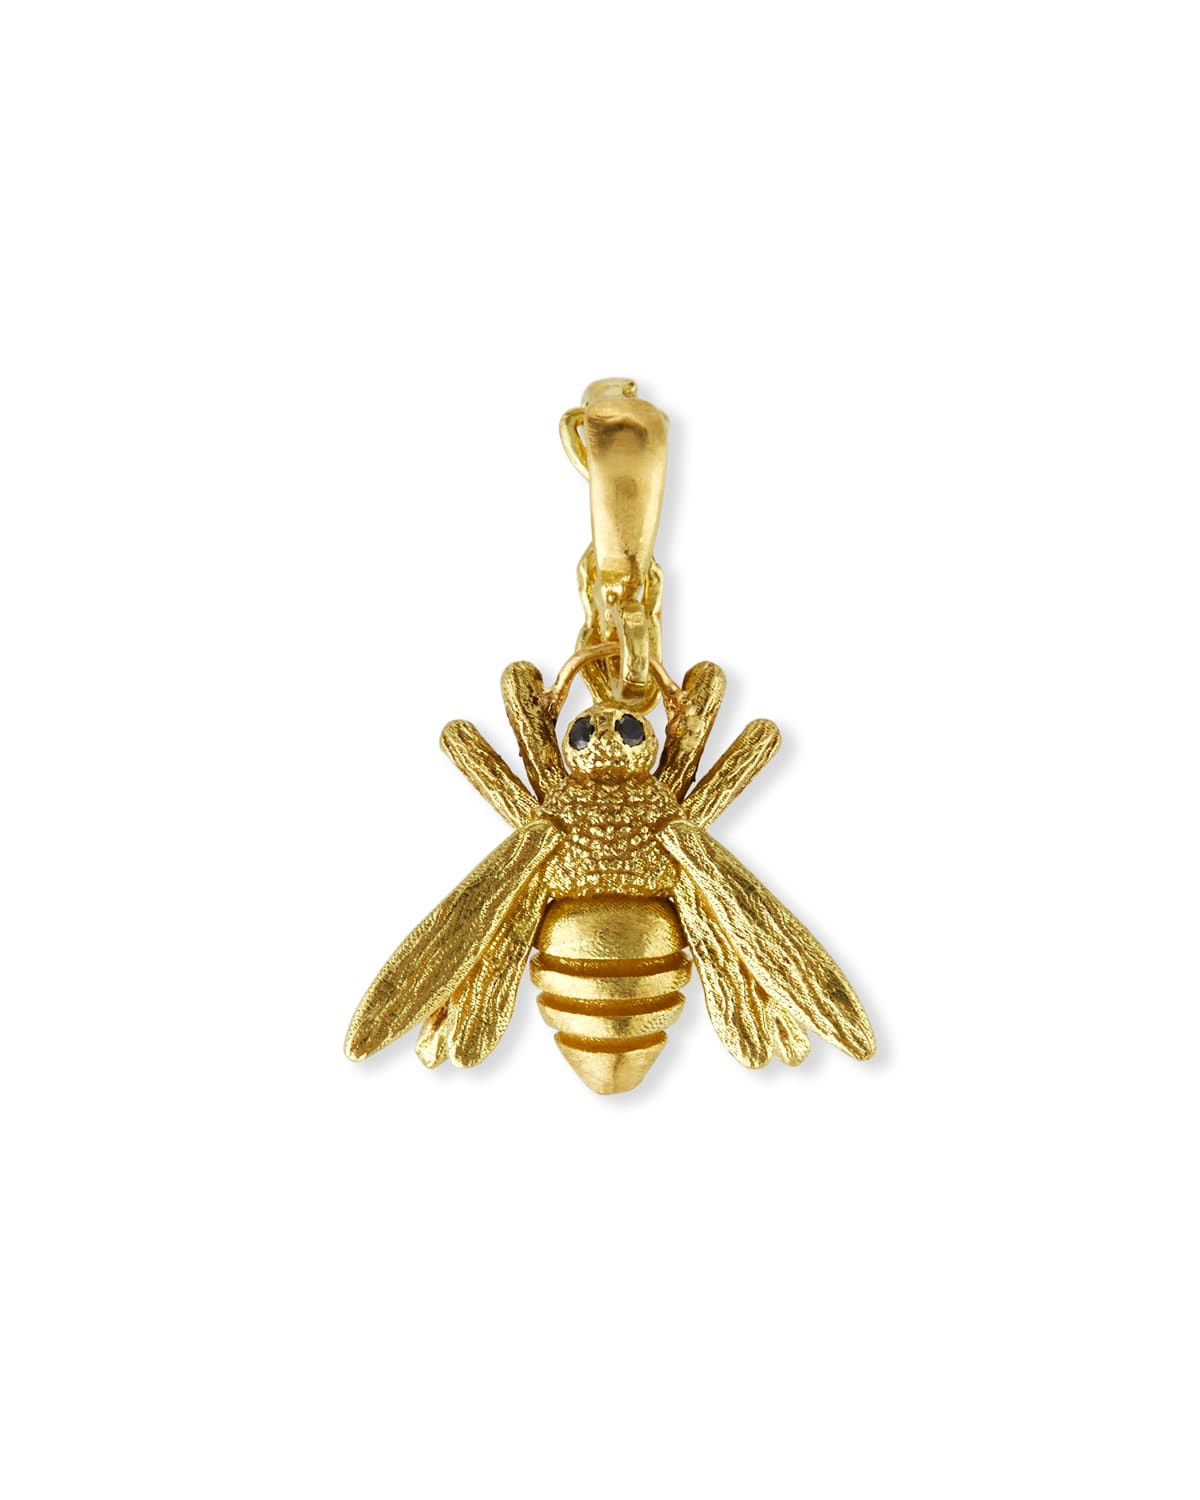 Dominique Cohen 18k Yellow Gold Bee Charm with Black Diamonds